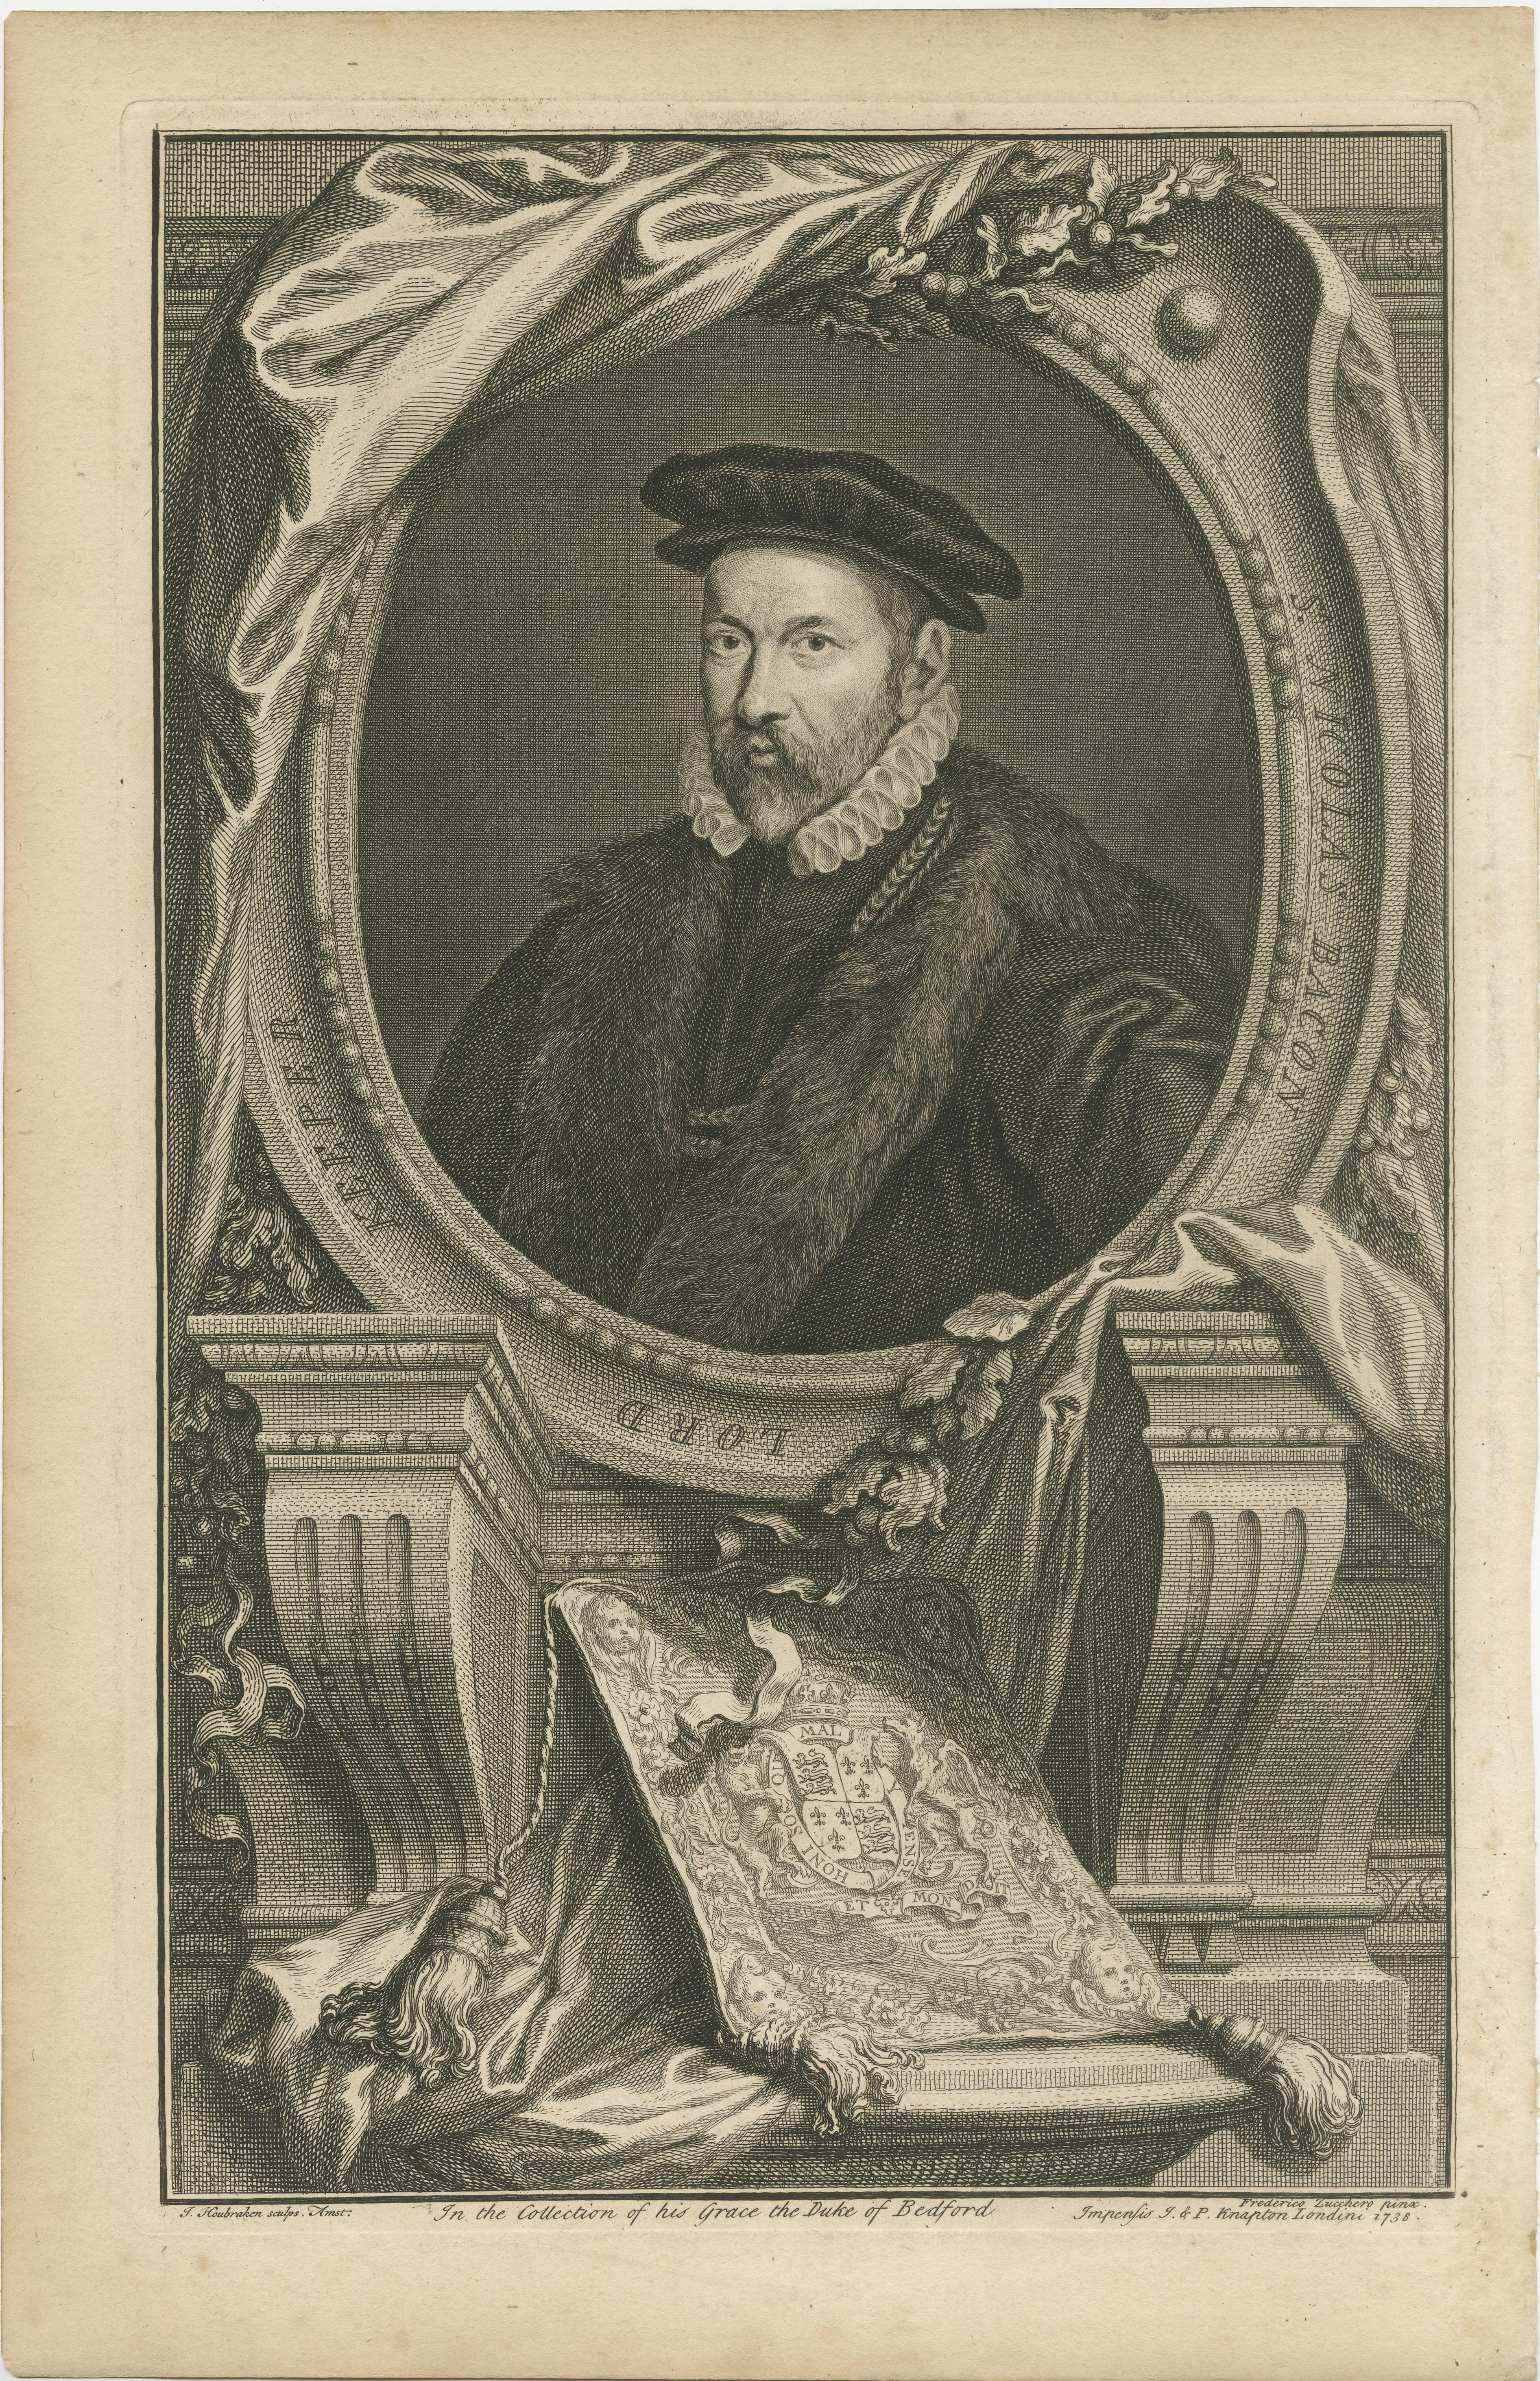 Antique portrait titled 'Sr. Nicolas Bacon Lord Keeper'. Sir Nicholas Bacon (28 December 1510 – 20 February 1579) was Lord Keeper of the Great Seal during the first half of the reign of Queen Elizabeth I of England. He was the father of the